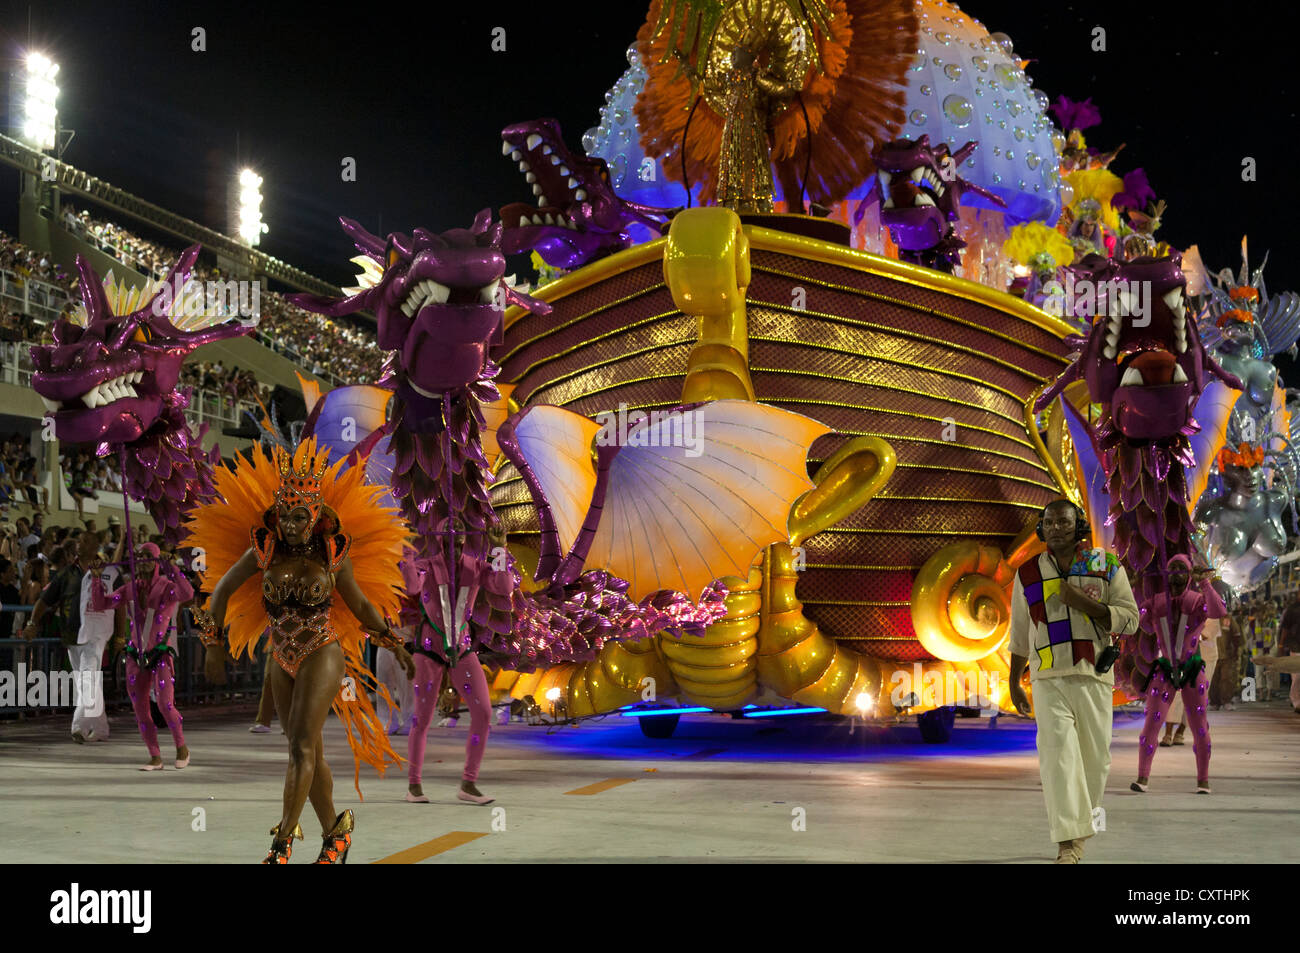 Woman leads Colourful Float During Carnival Parade Rio de Janeiro Brazil Stock Photo